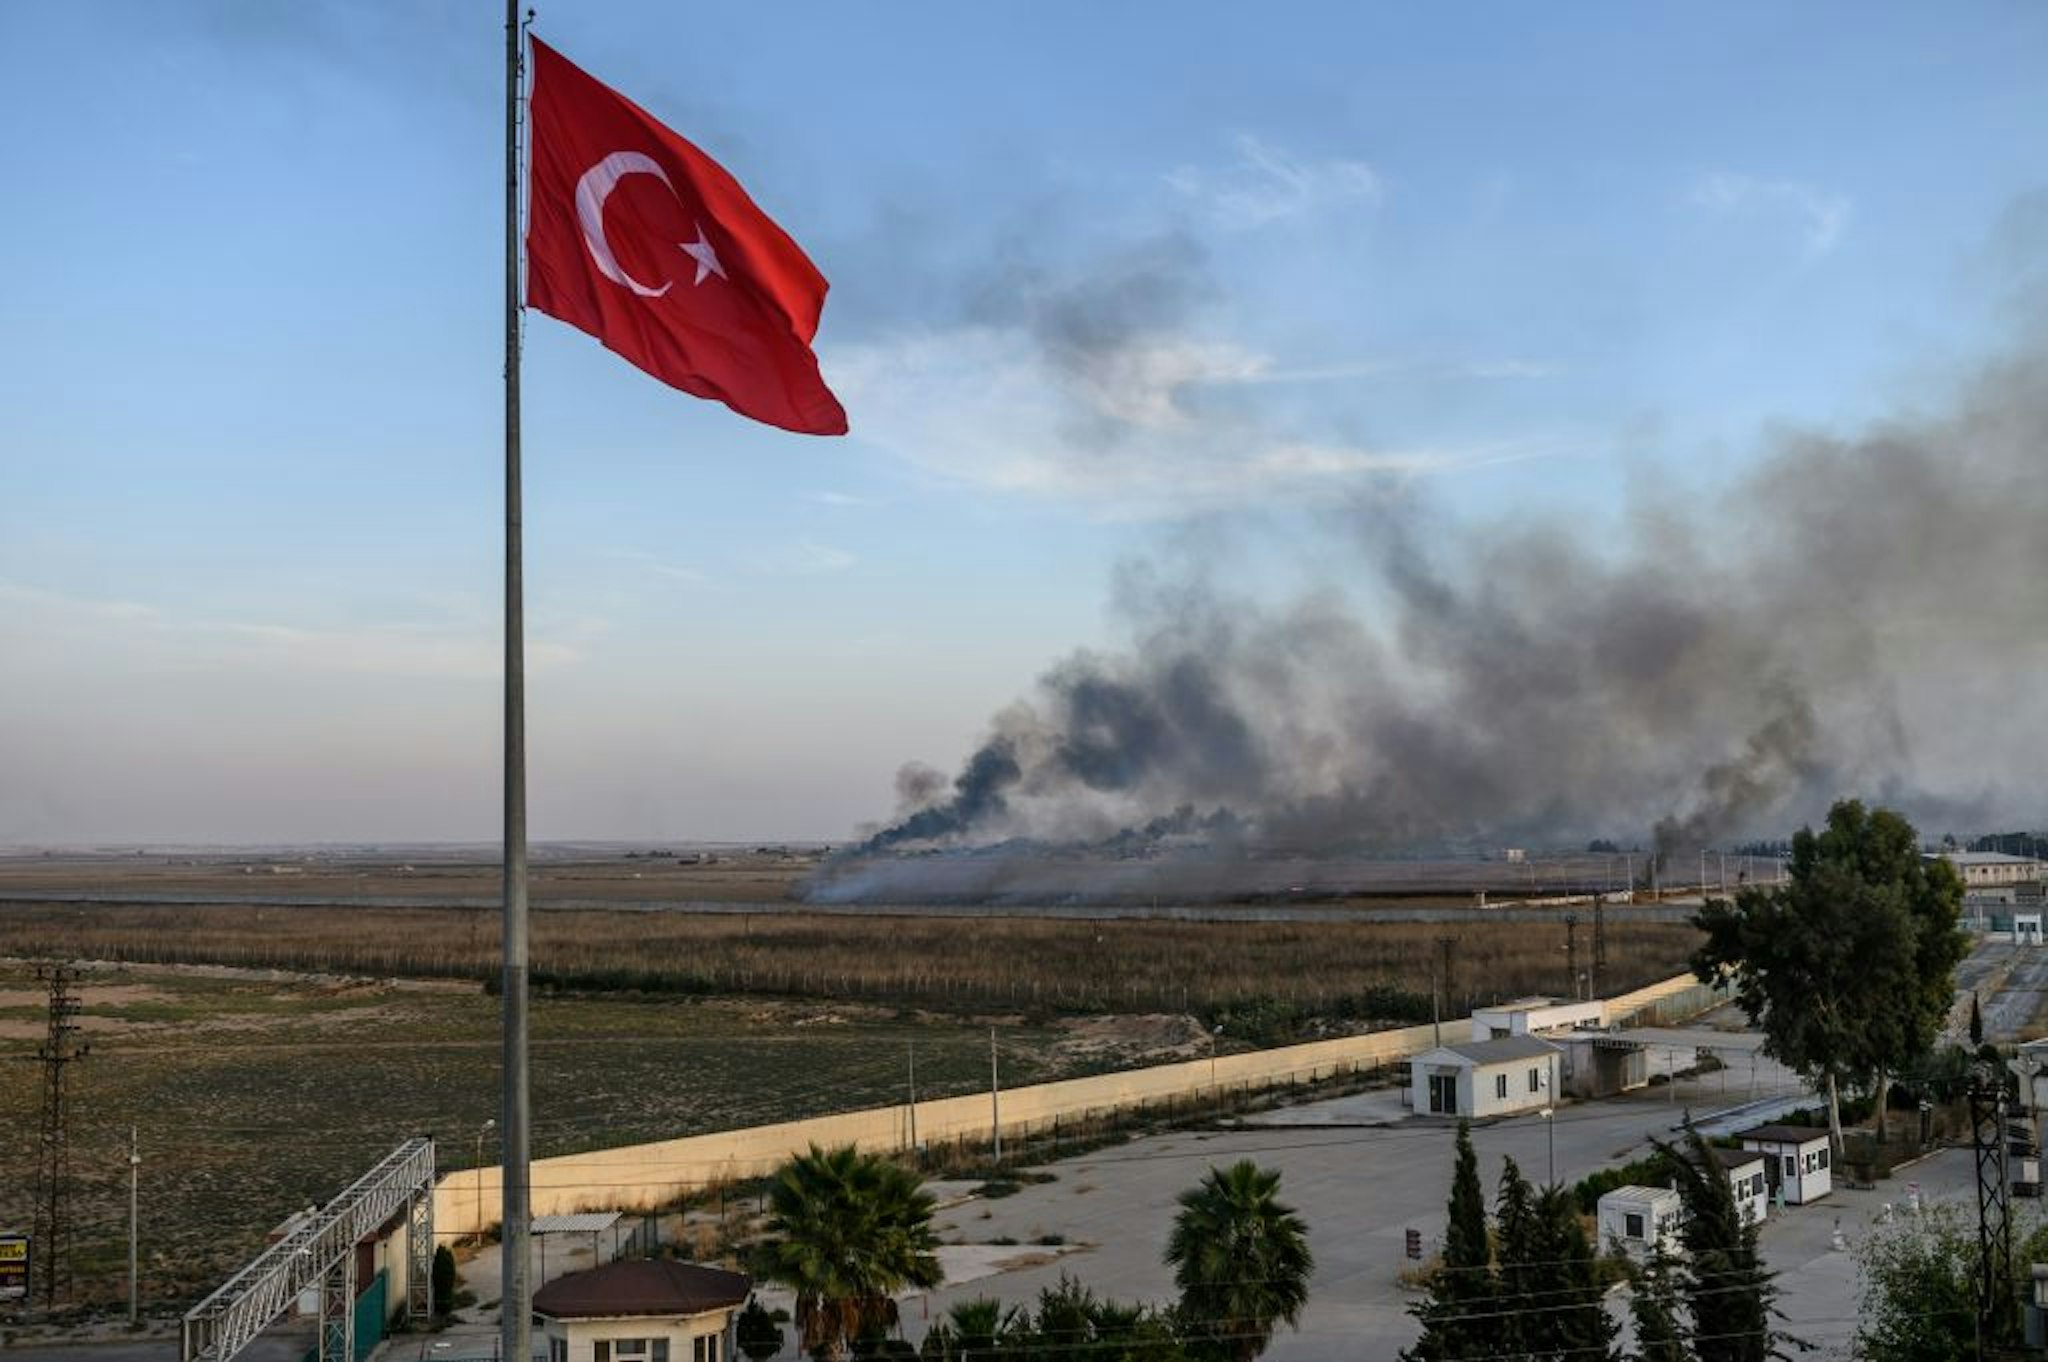 Smoke rises from the Syrian town of Tal Abyad, in a picture taken from the Turkish side of the border where the Turkish flag is seen in Akcakale on October 10, 2019, on the second day of Turkey's military operation against Kurdish forces.